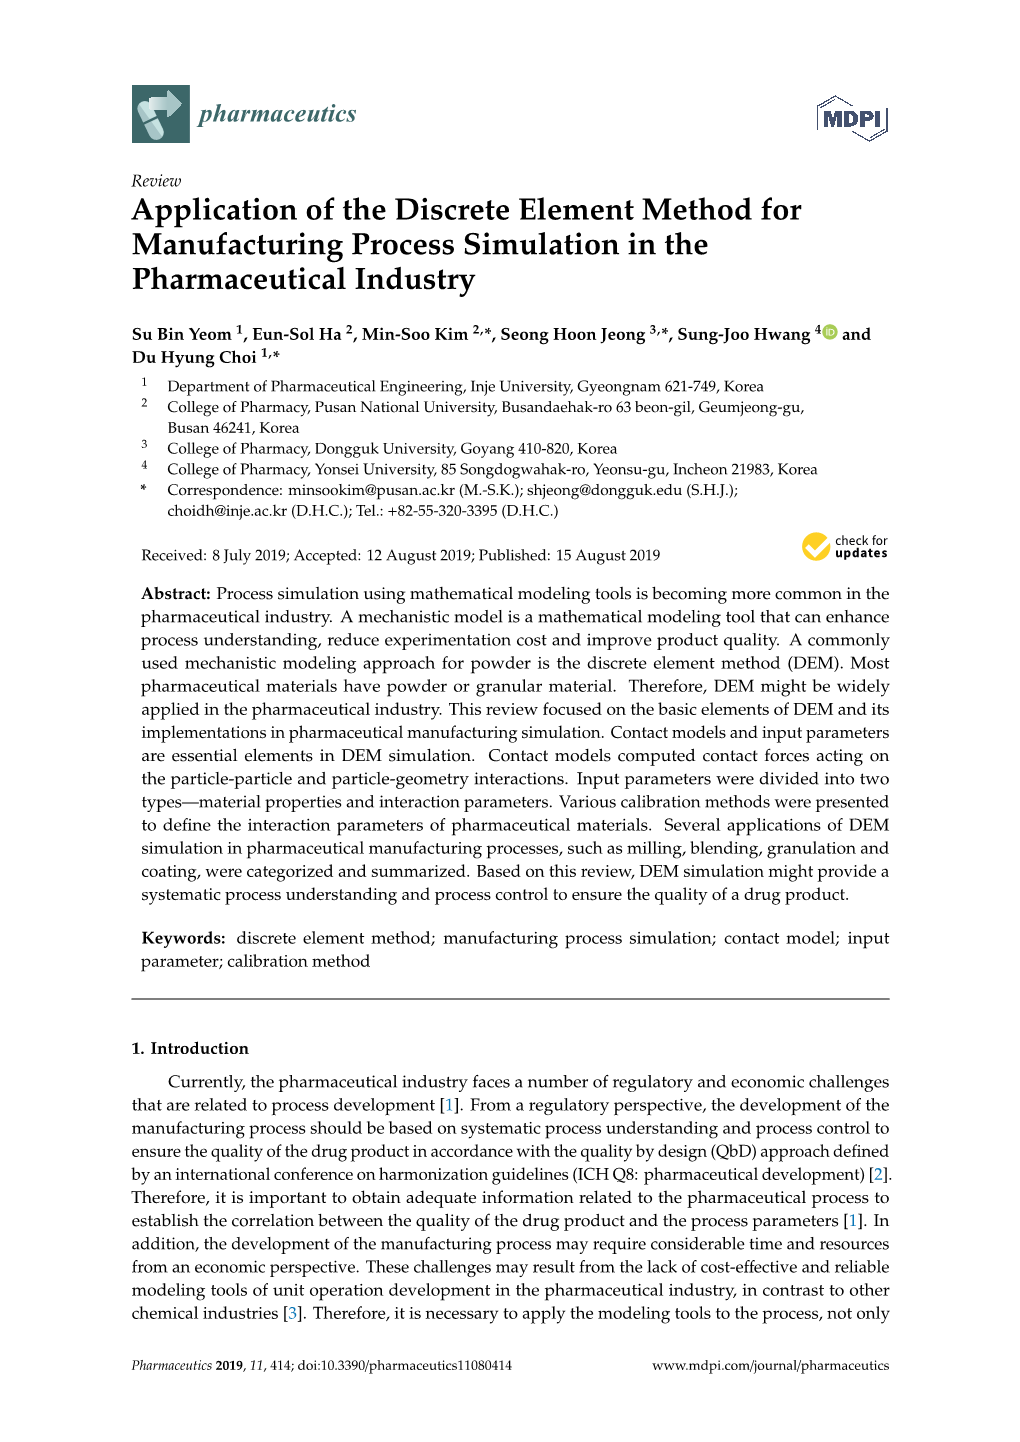 Application of the Discrete Element Method for Manufacturing Process Simulation in the Pharmaceutical Industry